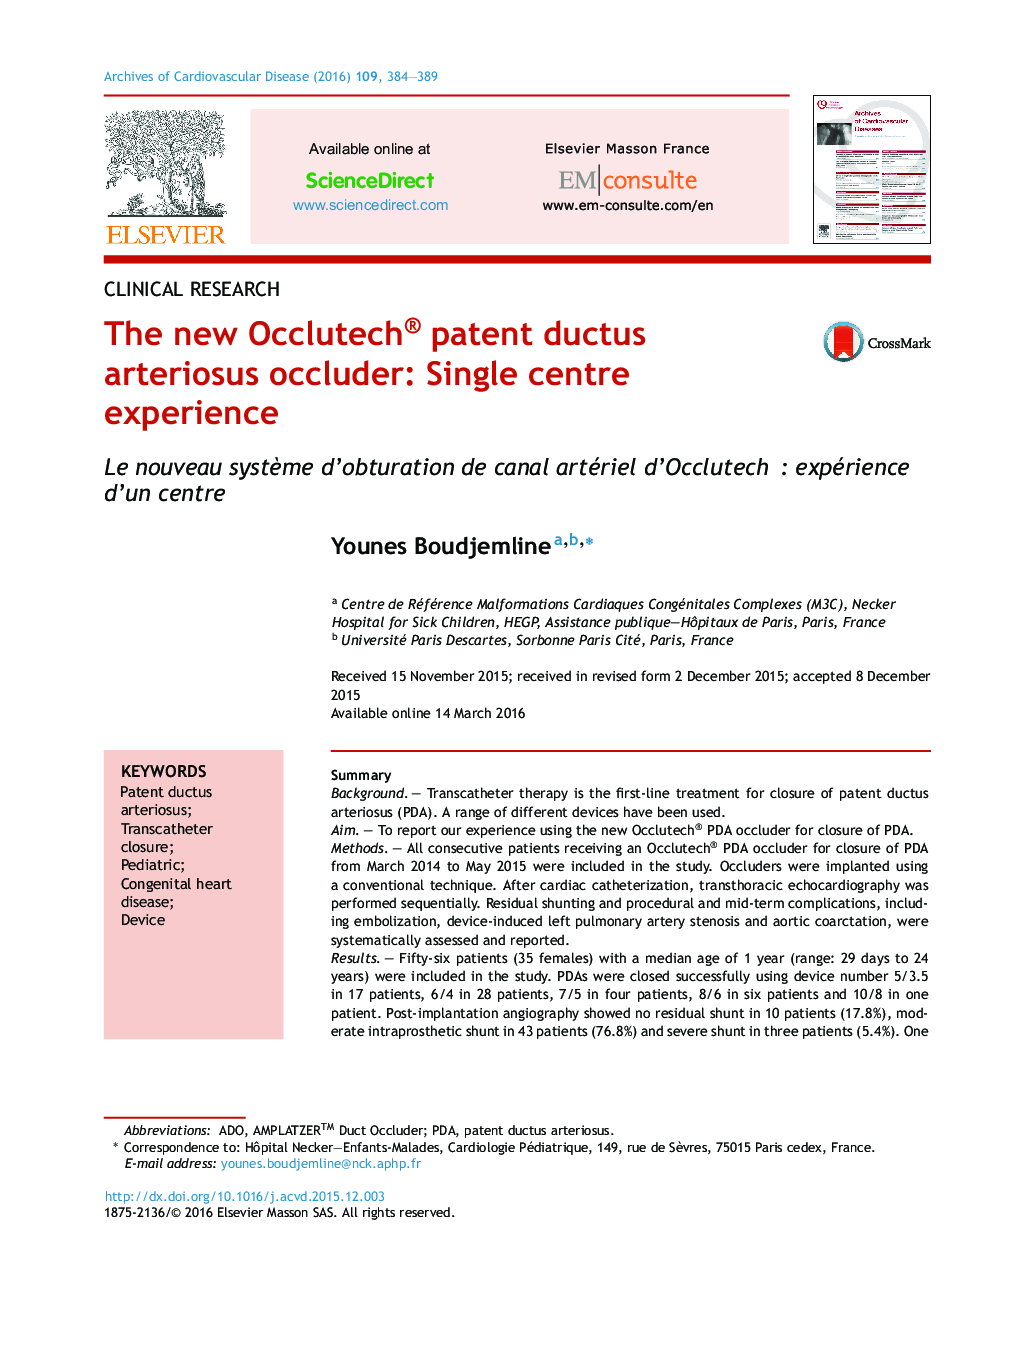 The new Occlutech® patent ductus arteriosus occluder: Single centre experience